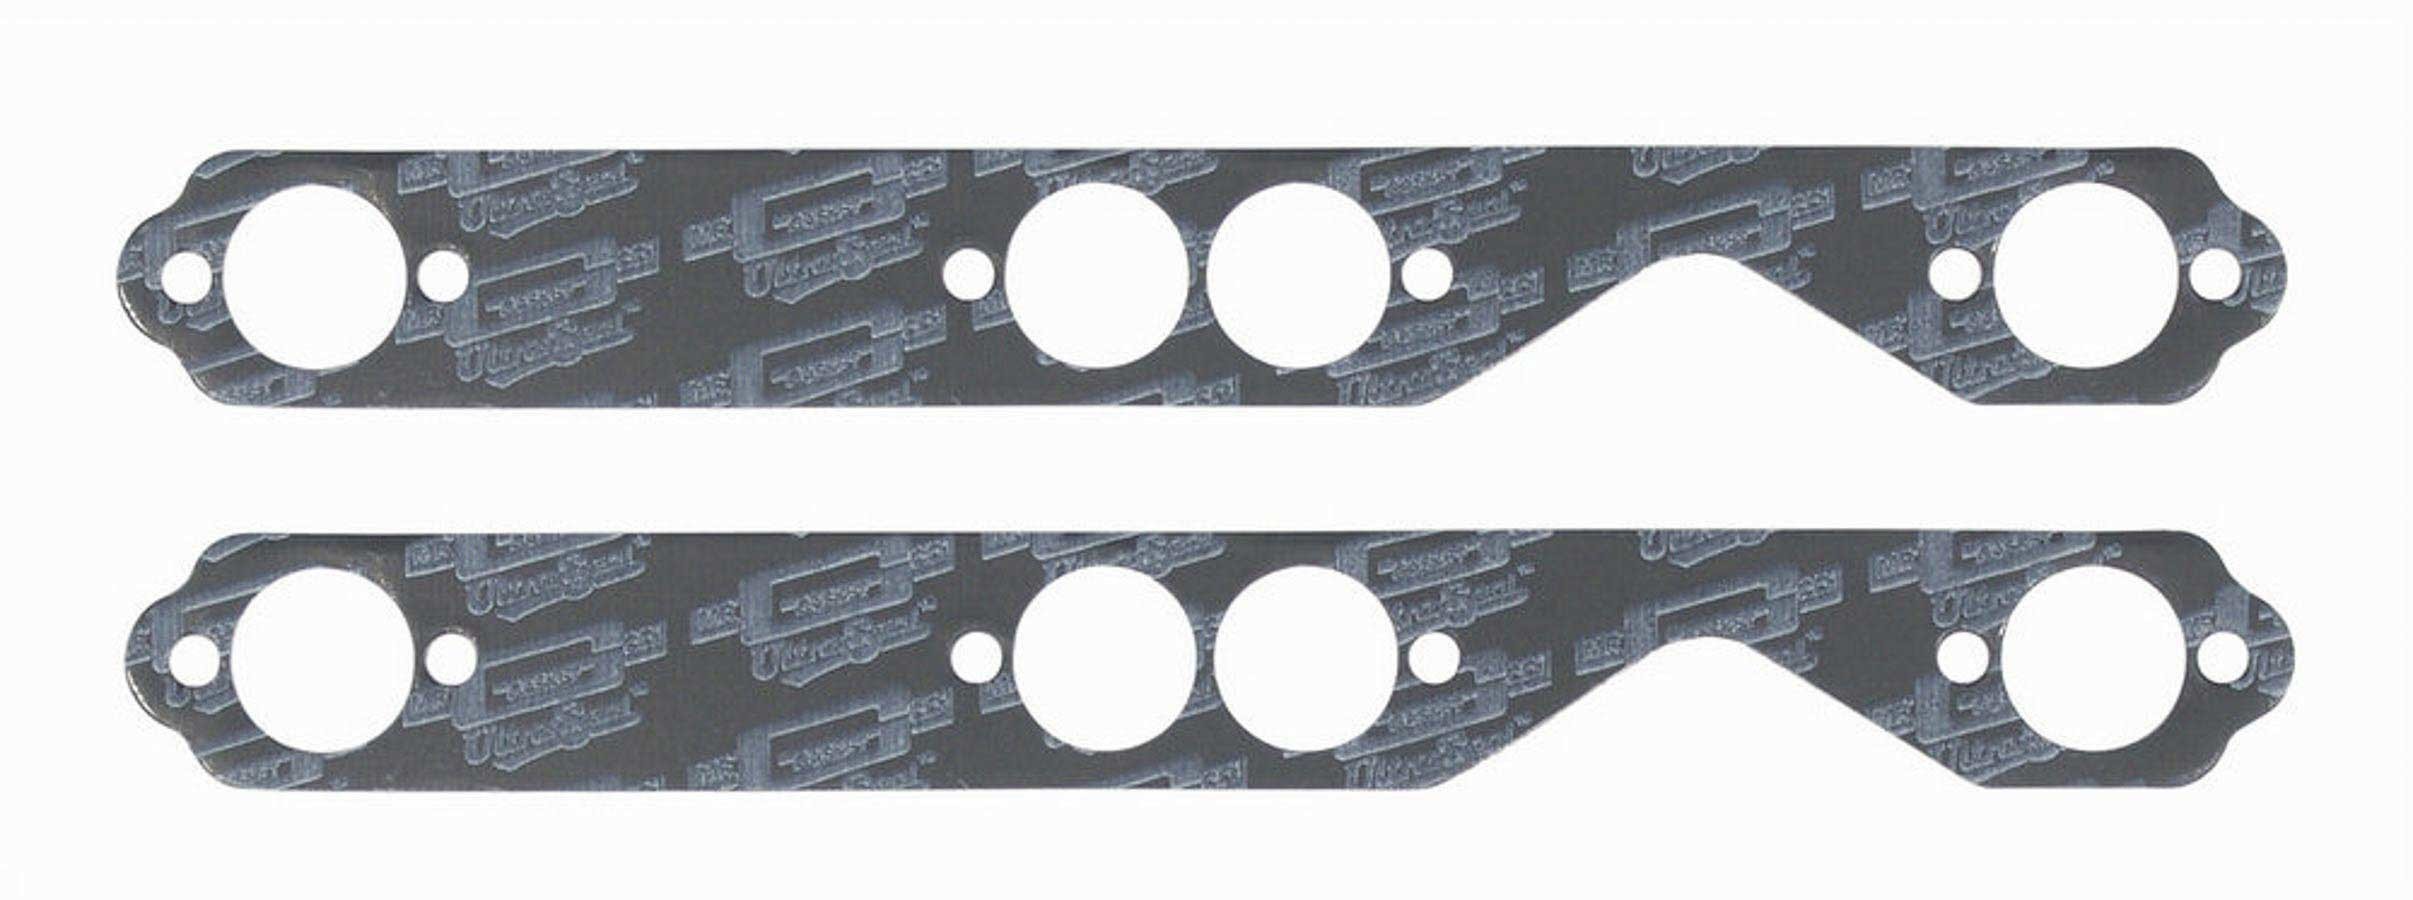 Sb Chevy Exhaust Gaskets - 5902